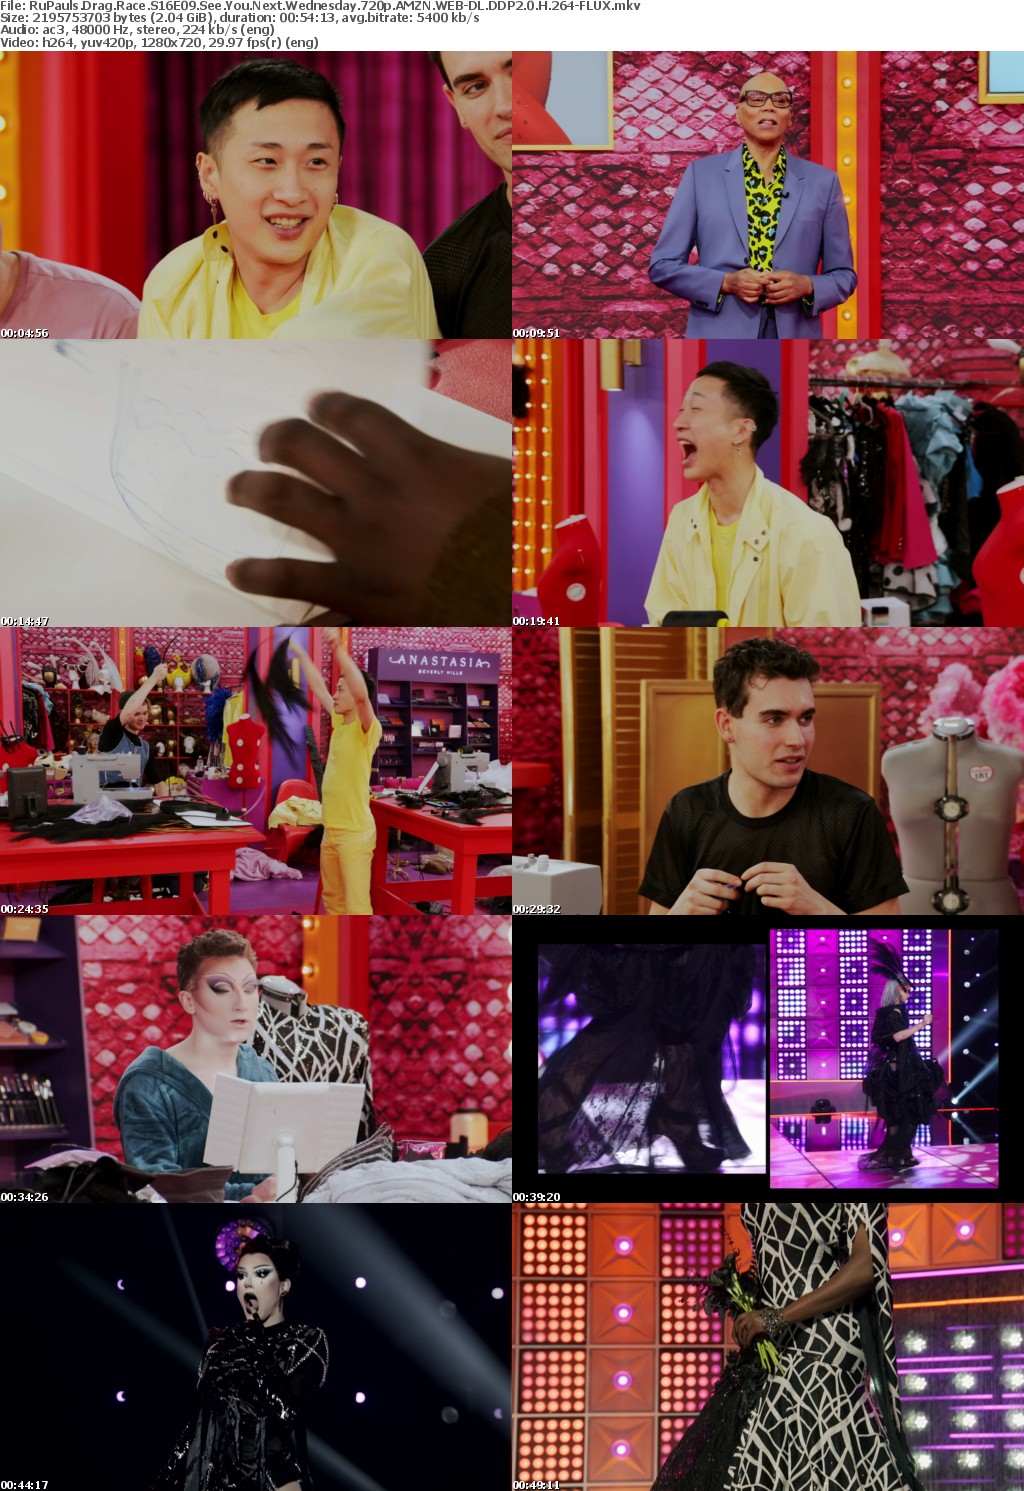 RuPauls Drag Race S16E09 See You Next Wednesday 720p AMZN WEB-DL DDP2 0 H 264-FLUX